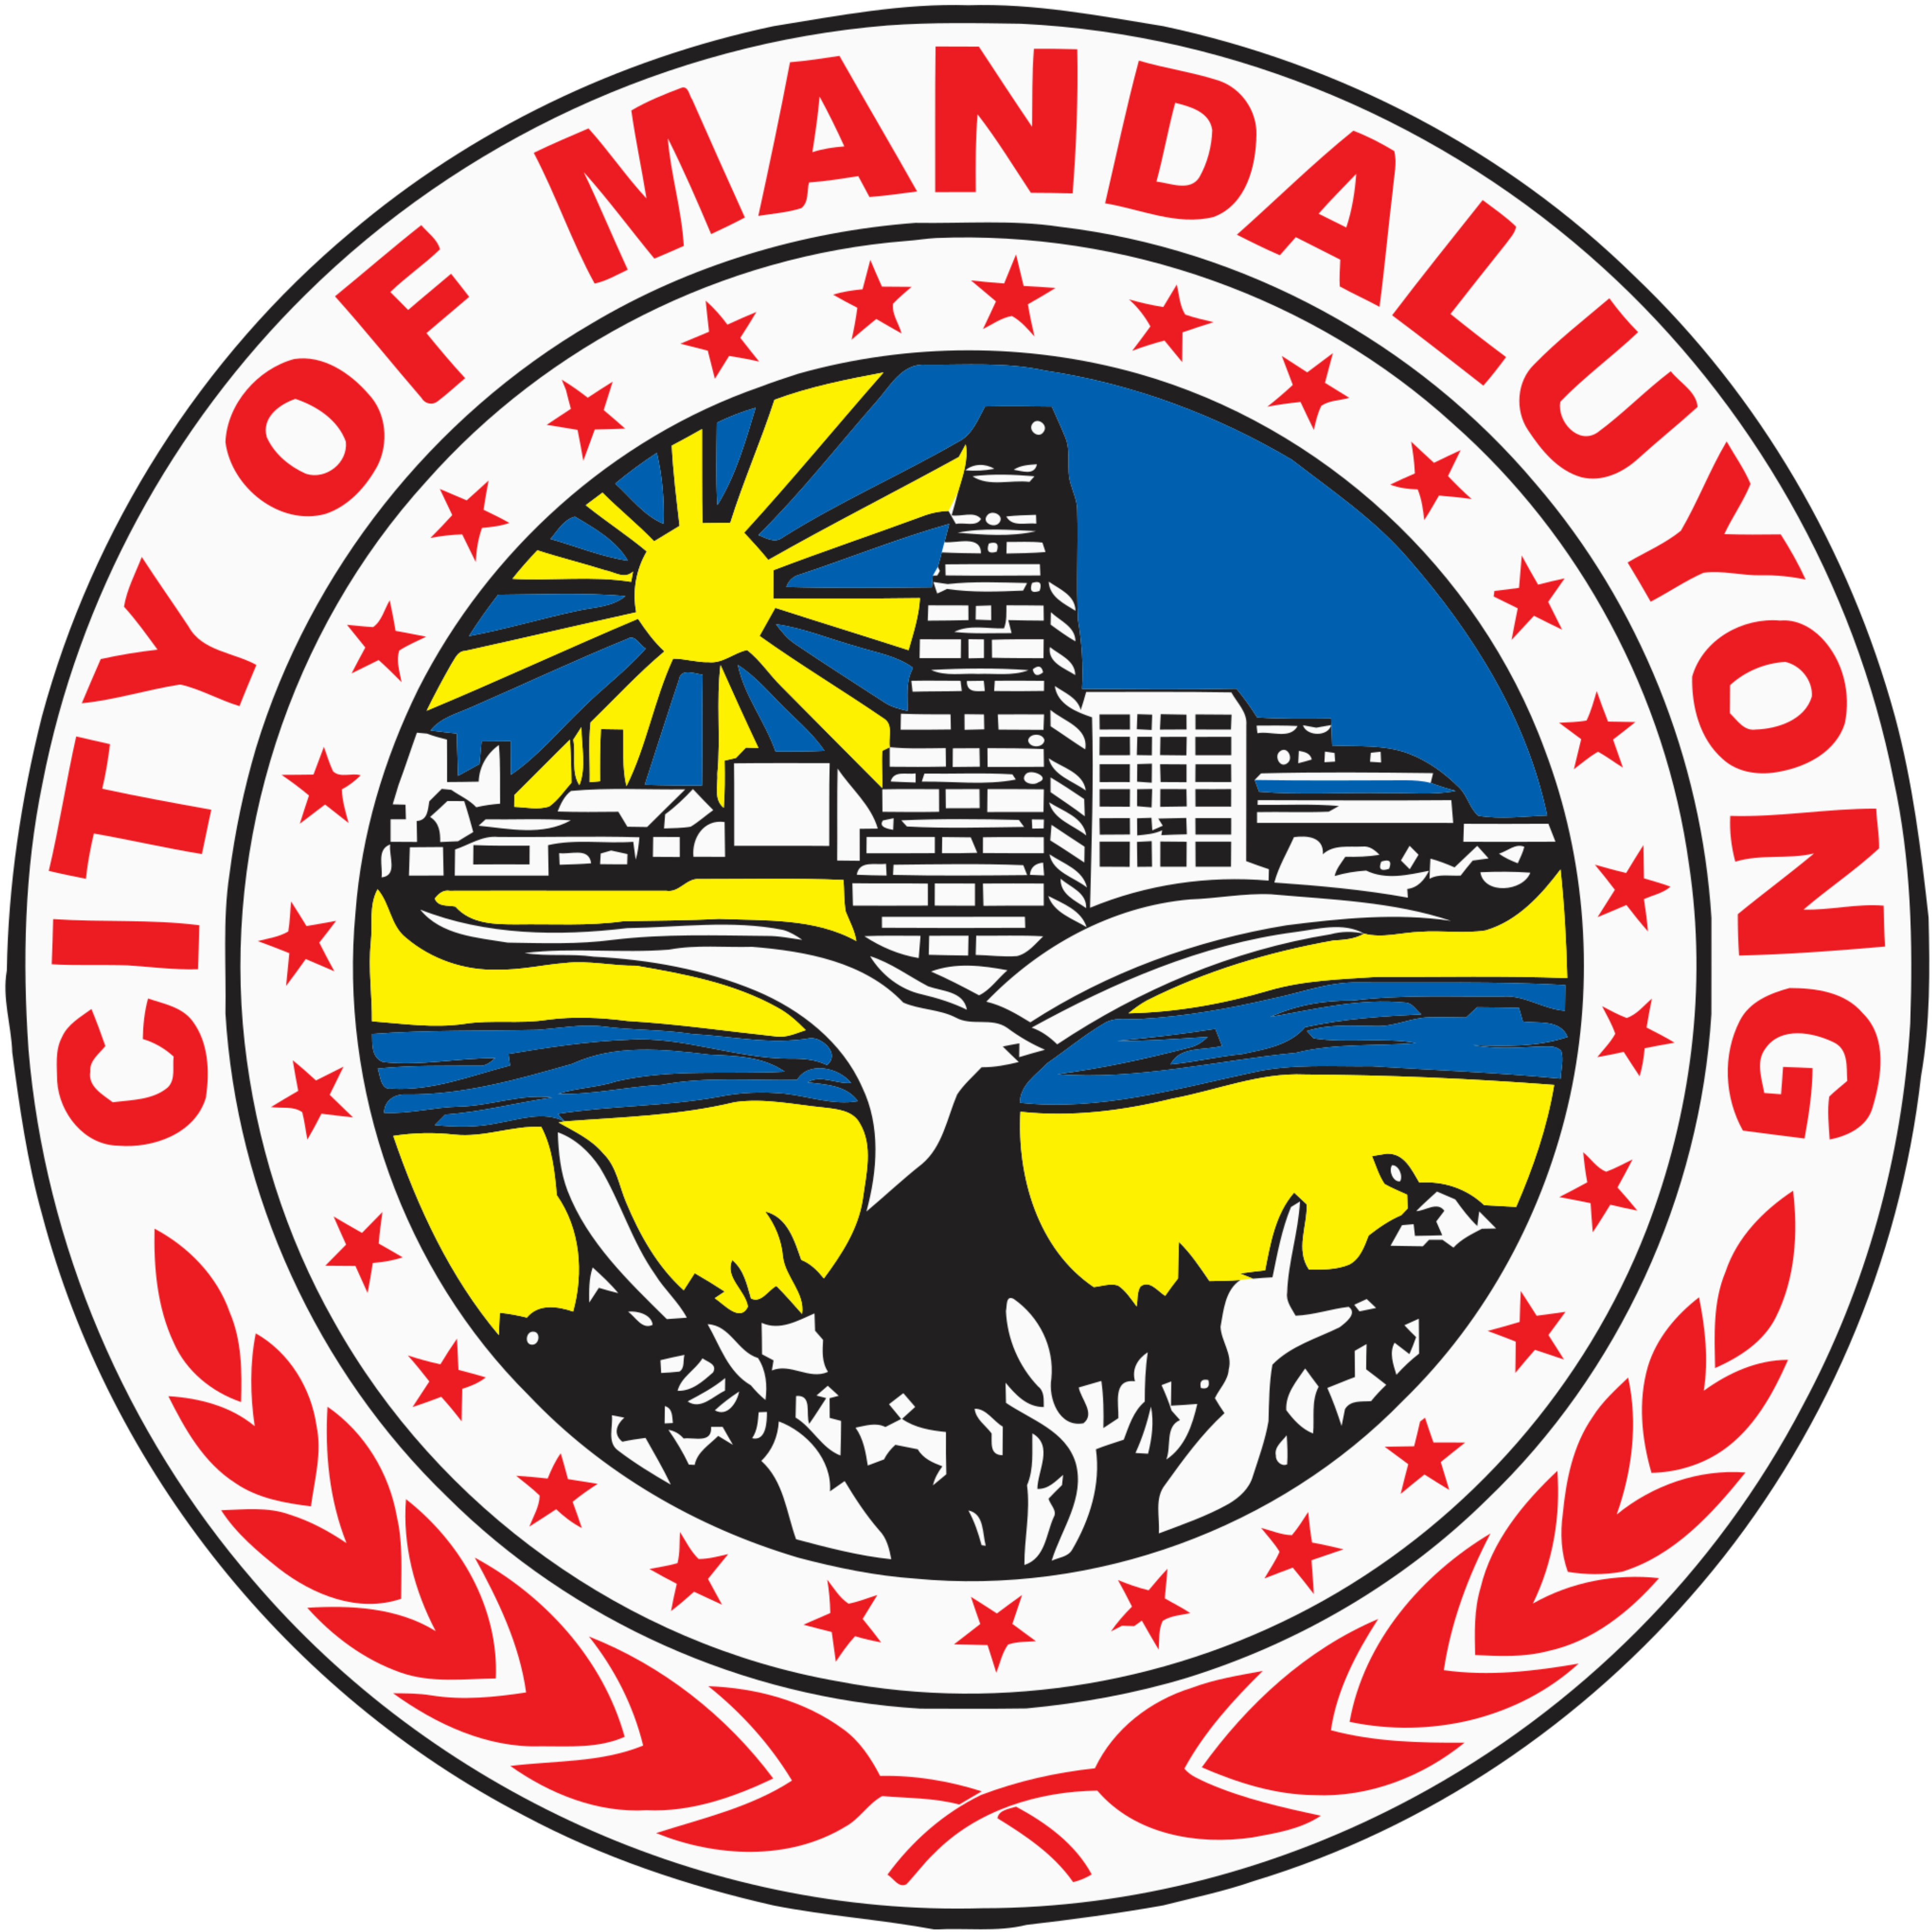 Related to Mandaluyong